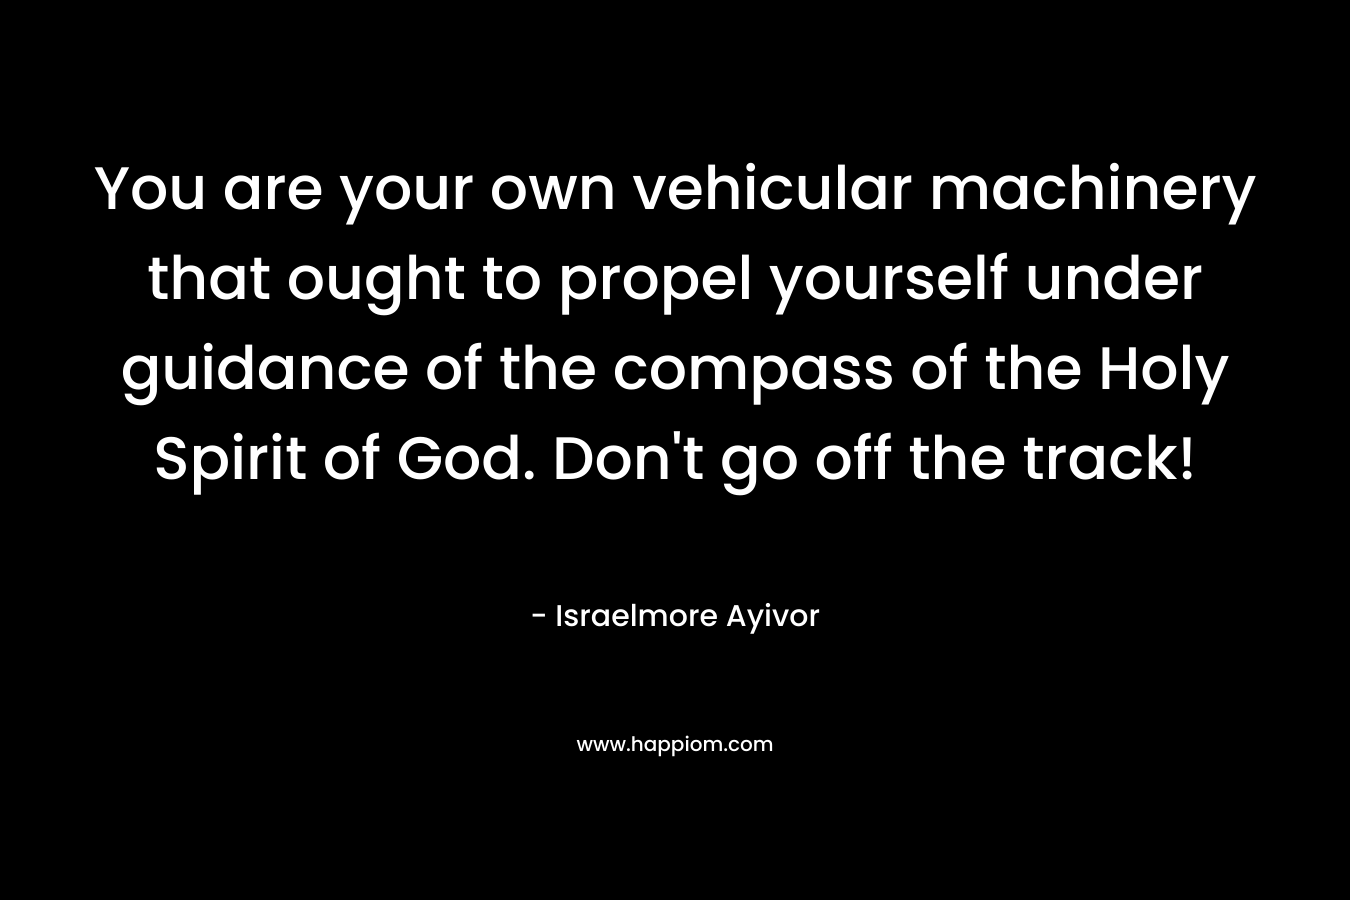 You are your own vehicular machinery that ought to propel yourself under guidance of the compass of the Holy Spirit of God. Don’t go off the track! – Israelmore Ayivor